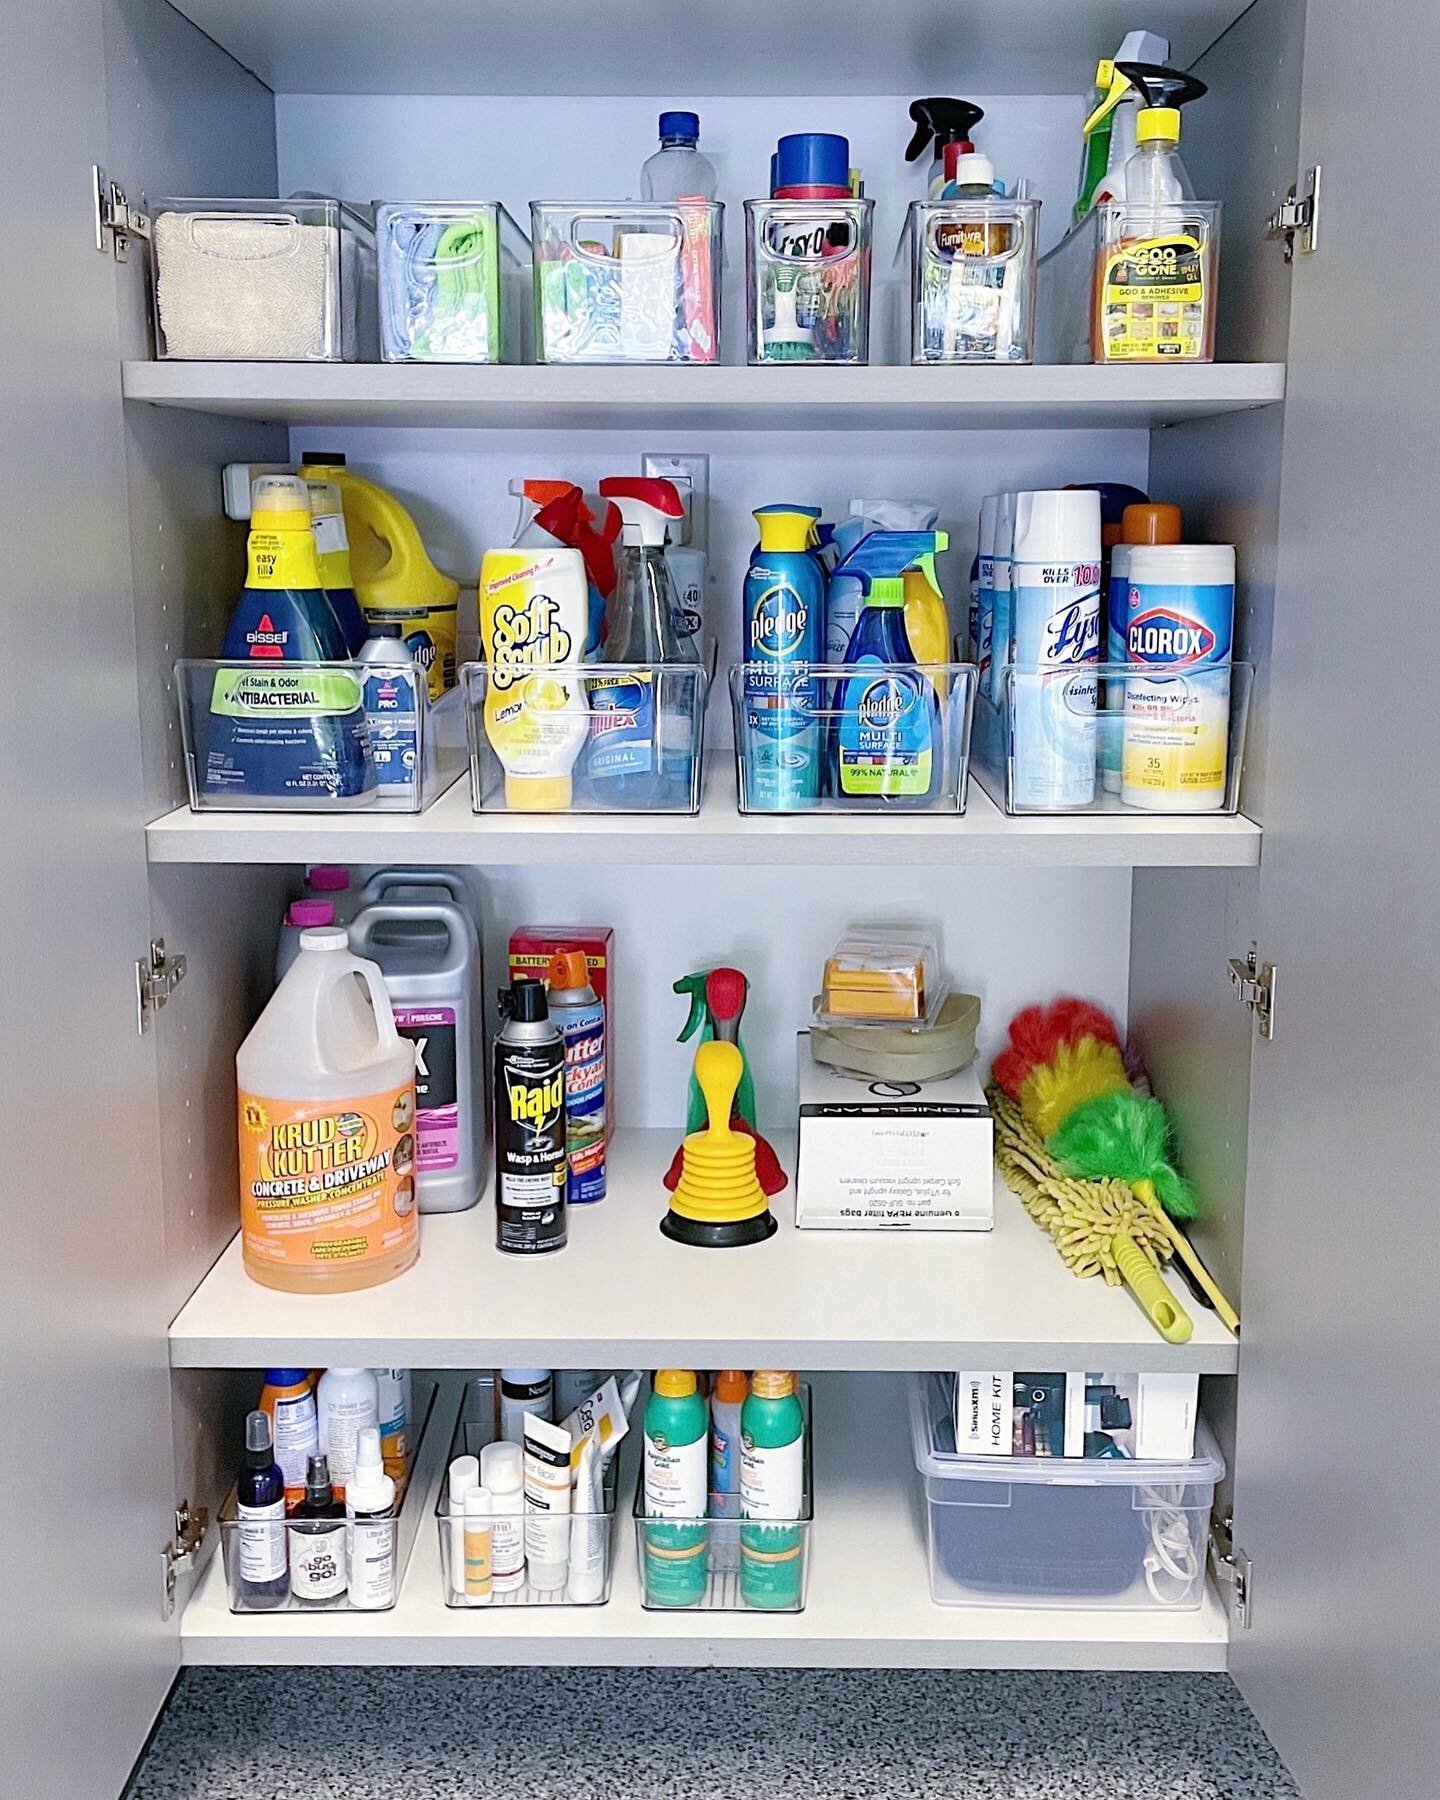 Organized garage cabinets✨
⠀⠀⠀⠀⠀⠀⠀⠀⠀
⠀⠀⠀⠀⠀⠀⠀⠀⠀
We helped our client, design a custom garage for their new home that included cabinets to hide items. Their things are contained, easy to find and use (they requested no labels) but the visual clutter is